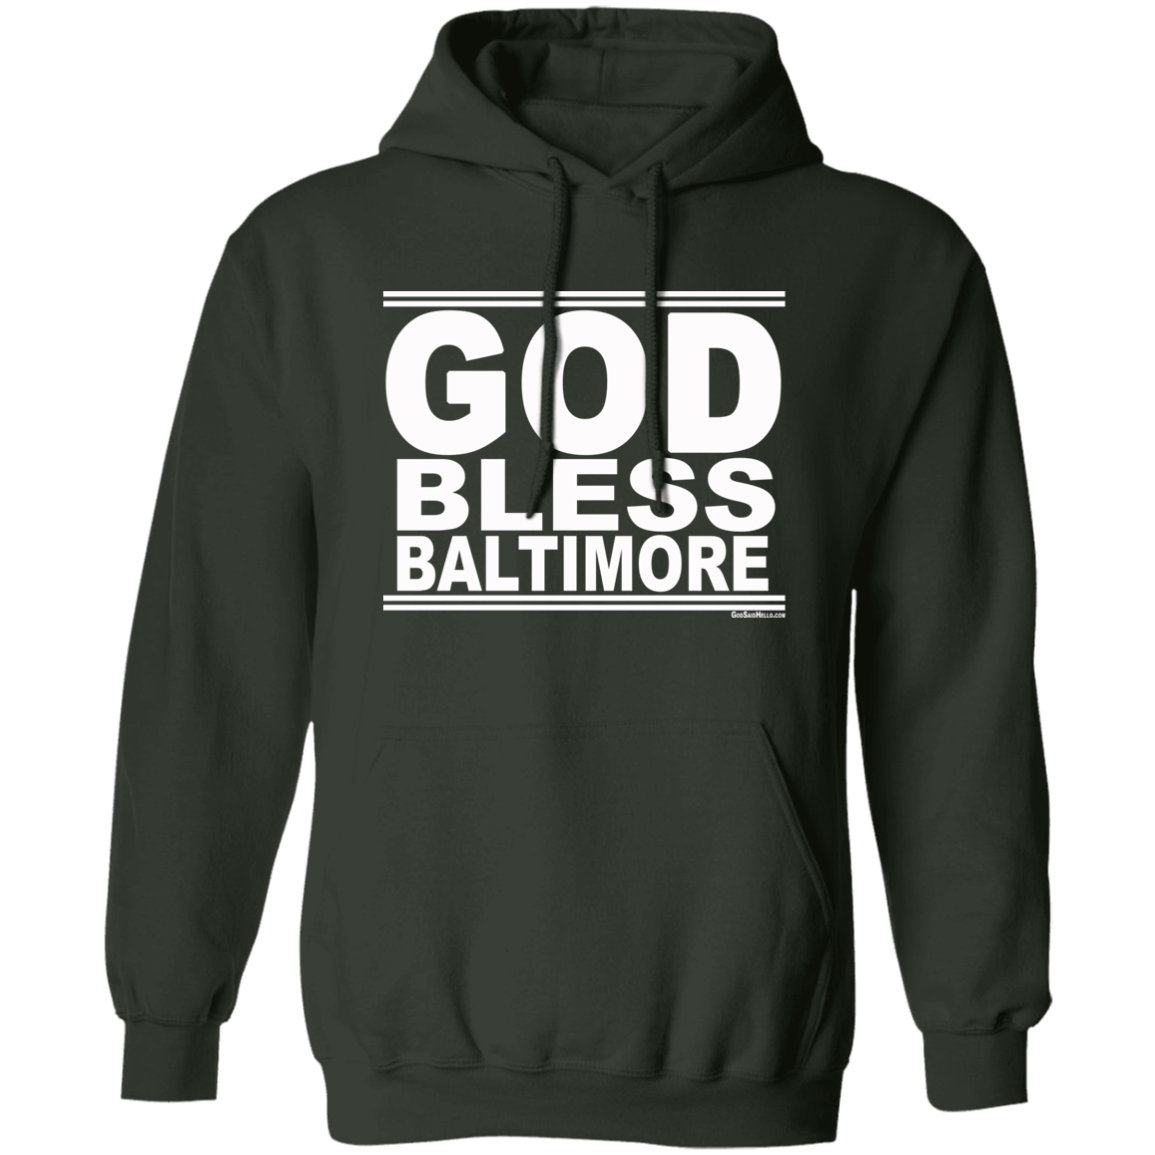 #GodBlessBaltimore - Pullover Hoodie